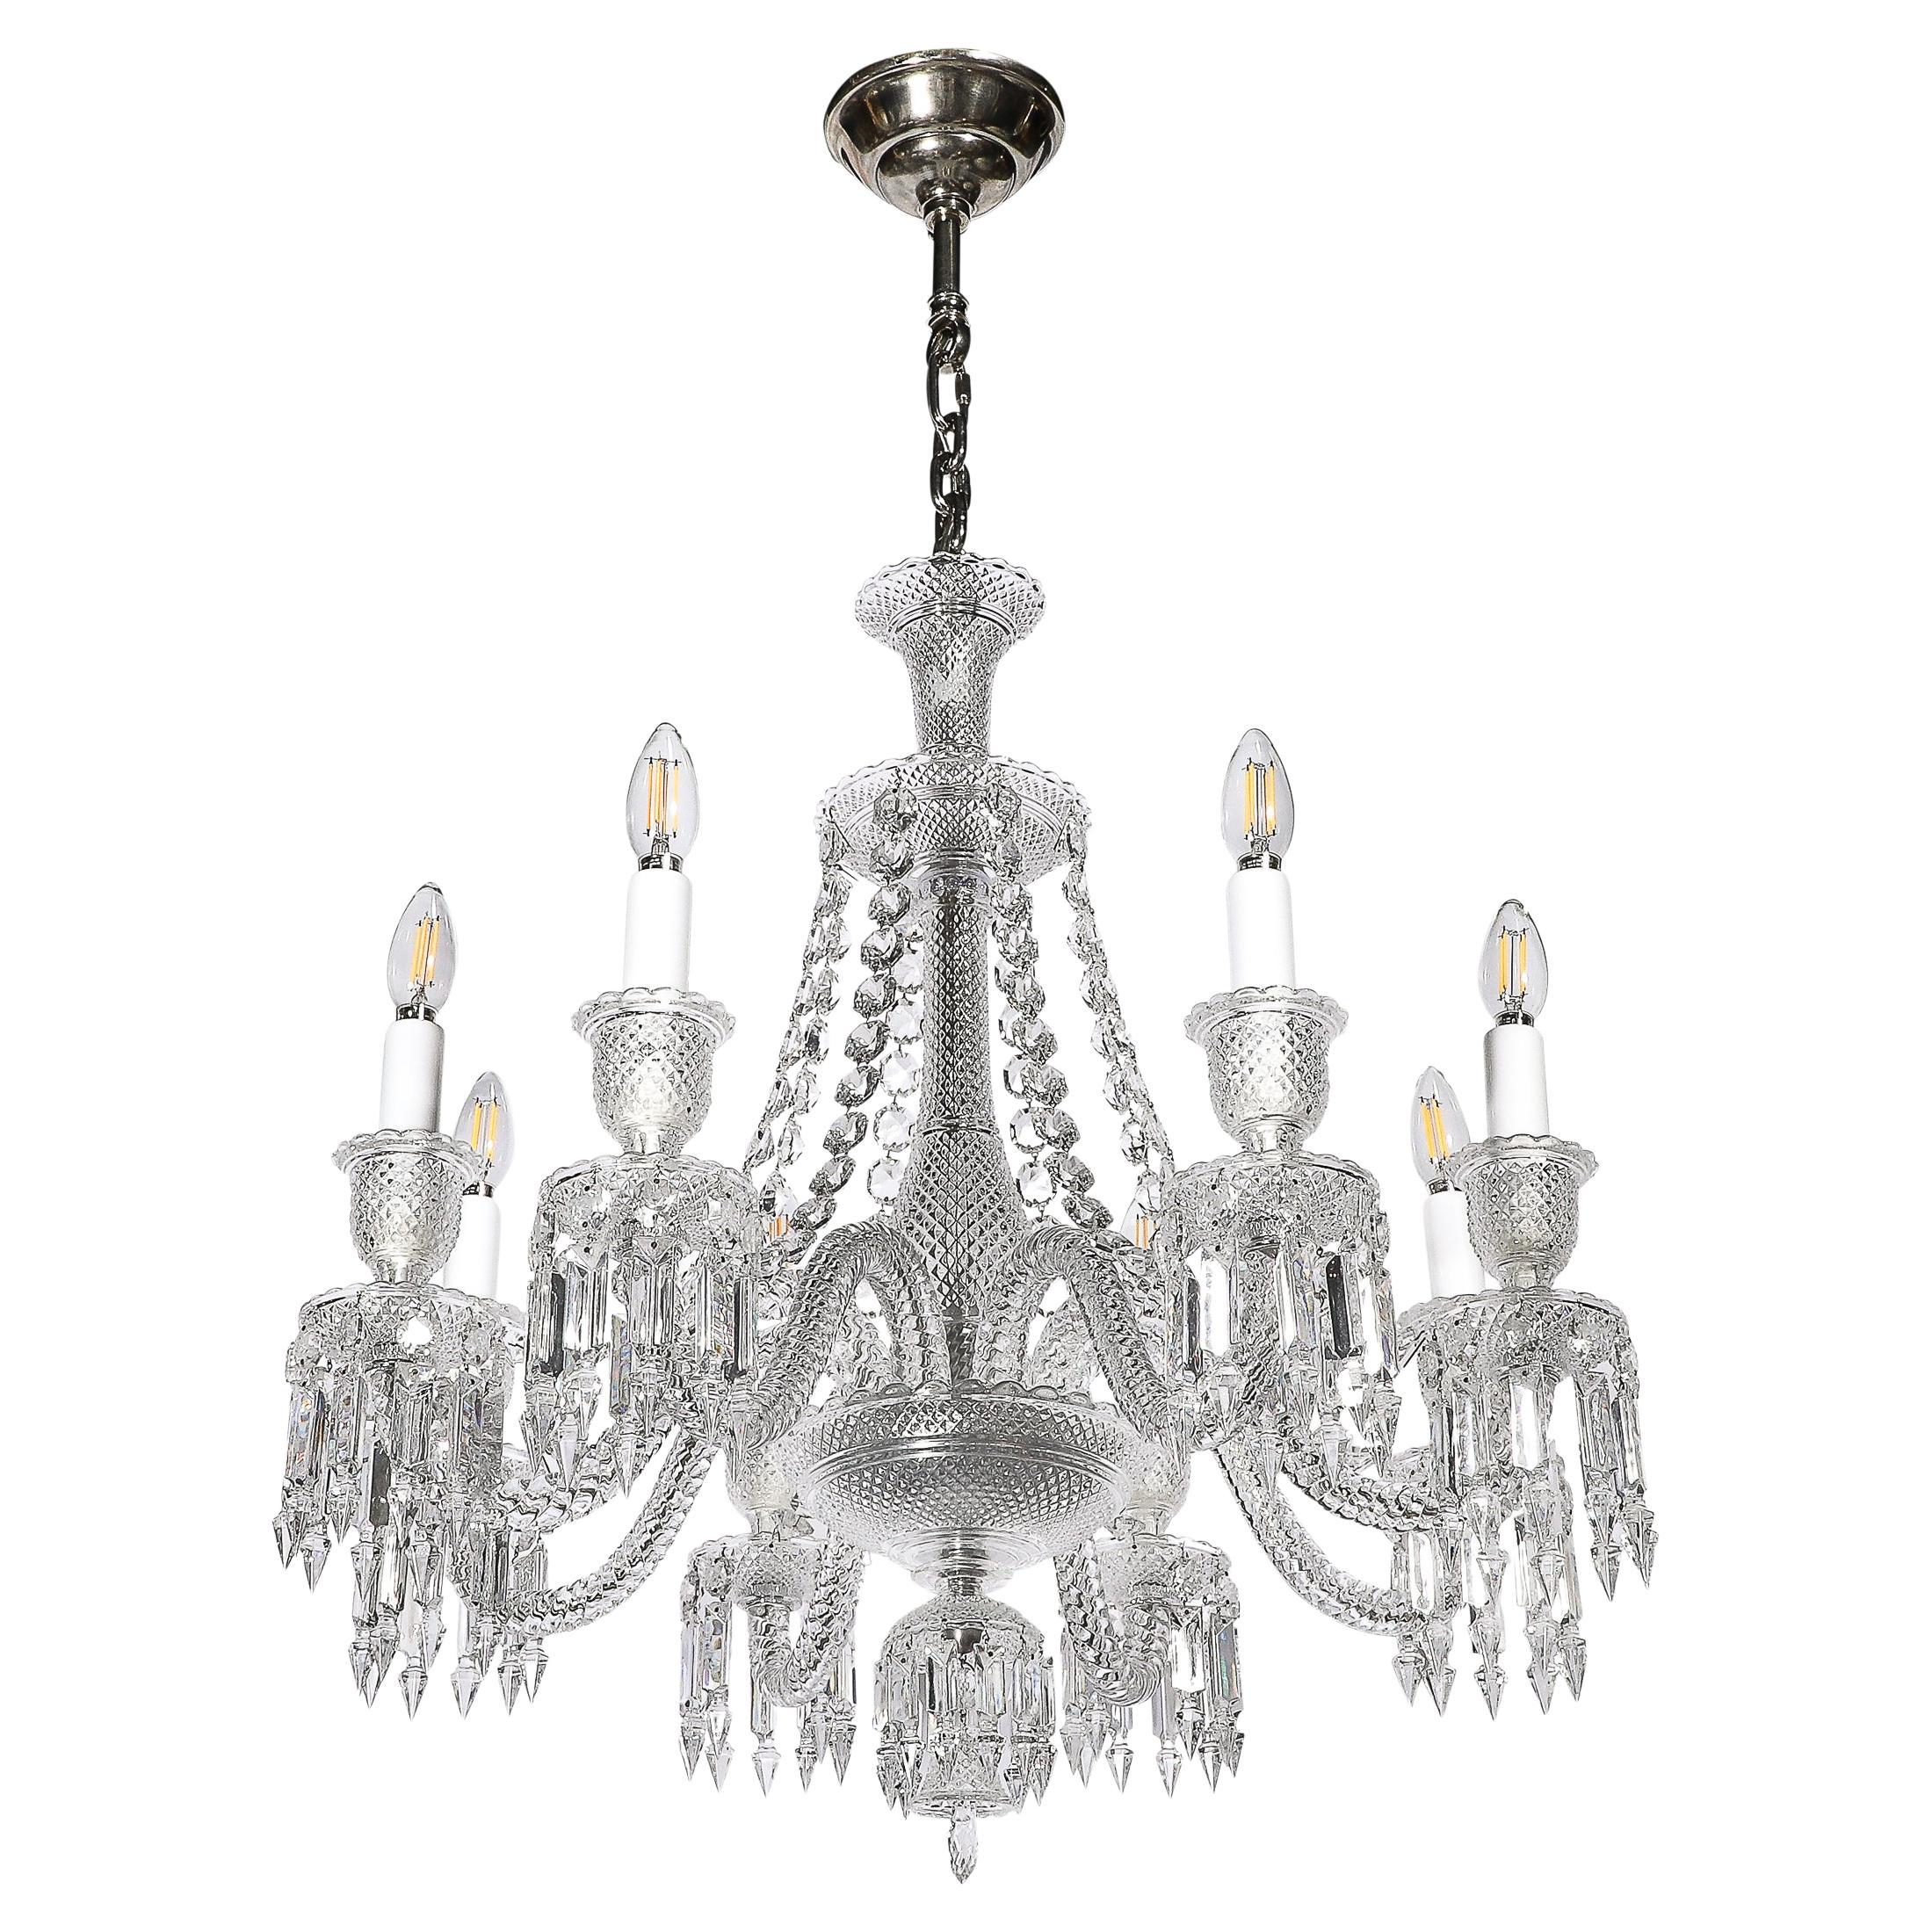 Mid-Century Modernist Eight Light Crystal "Zenith" Chandelier by Baccarat